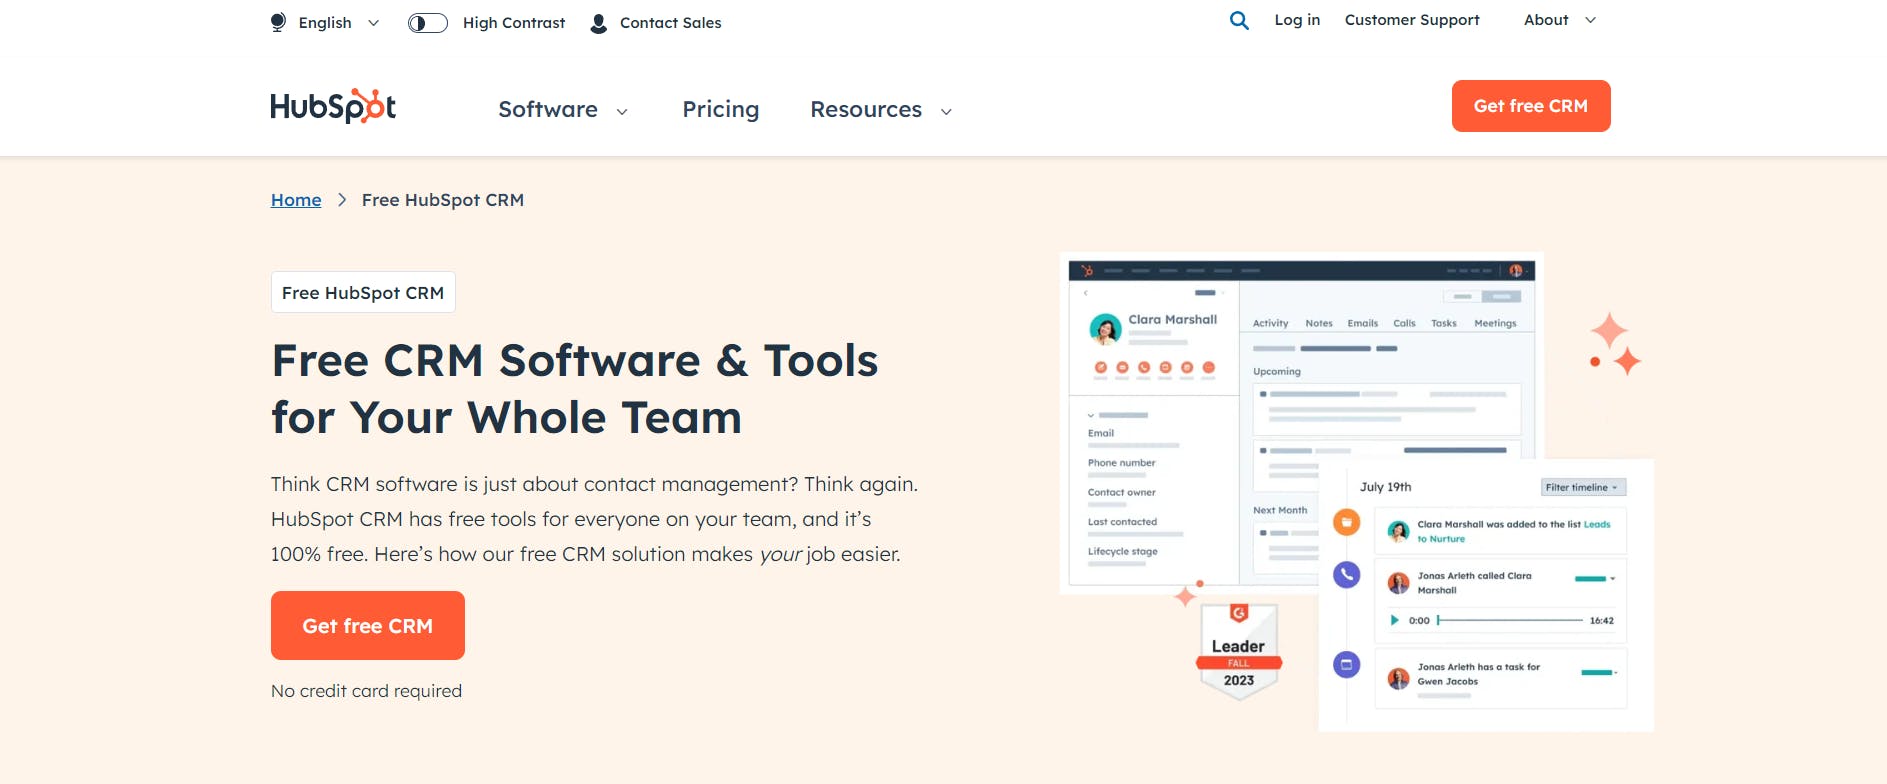 HubSpot CRM home page